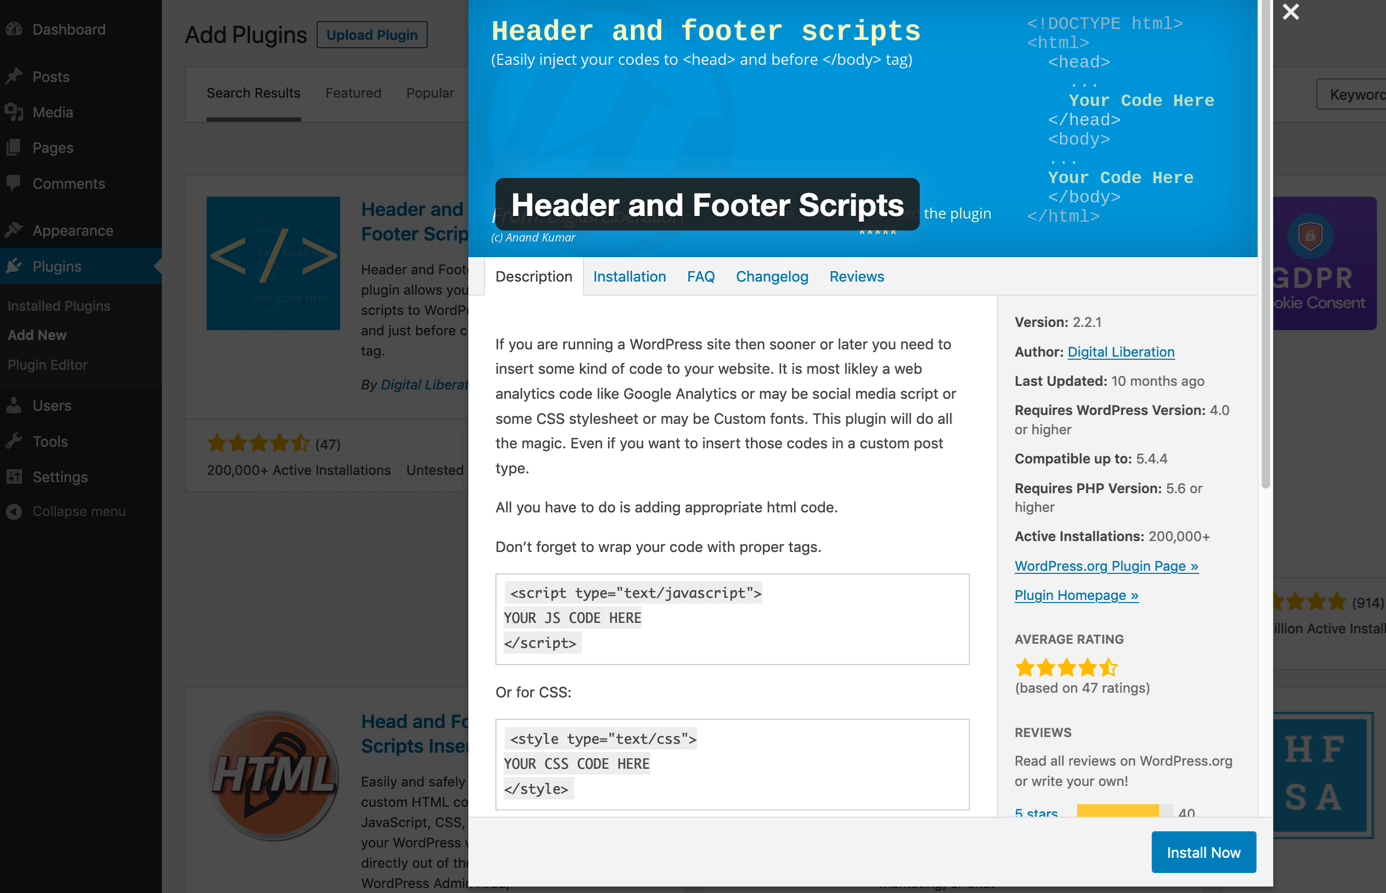 Installez le plugin Header and Footer Scripts